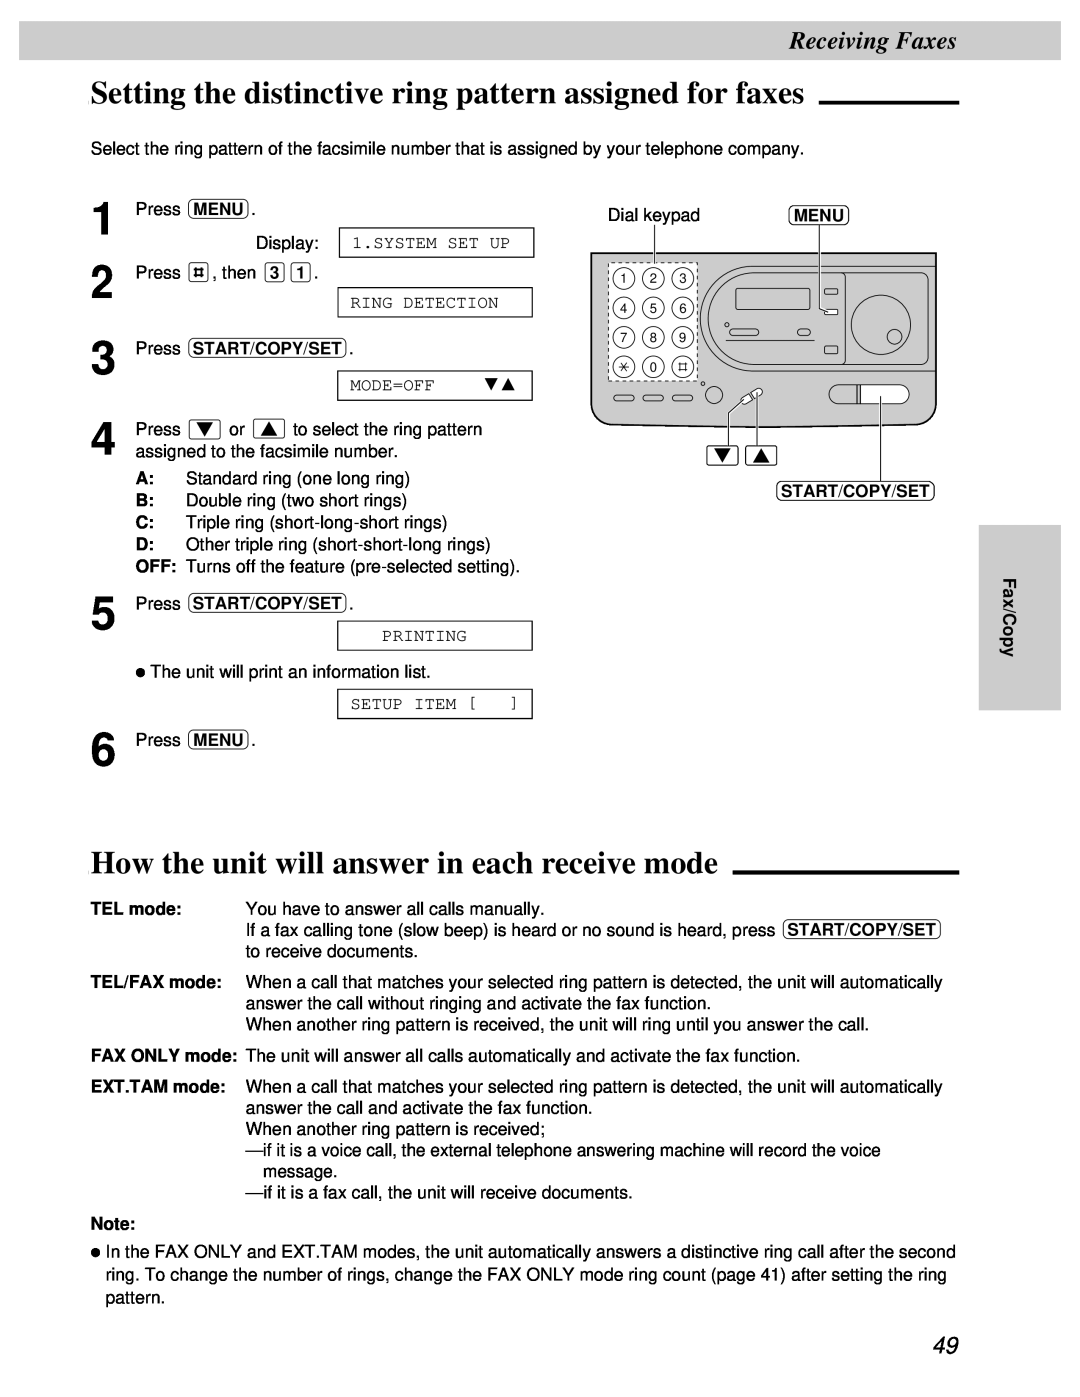 Panasonic KX-FT31BX Setting the distinctive ring pattern assigned for faxes, How the unit will answer in each receive mode 